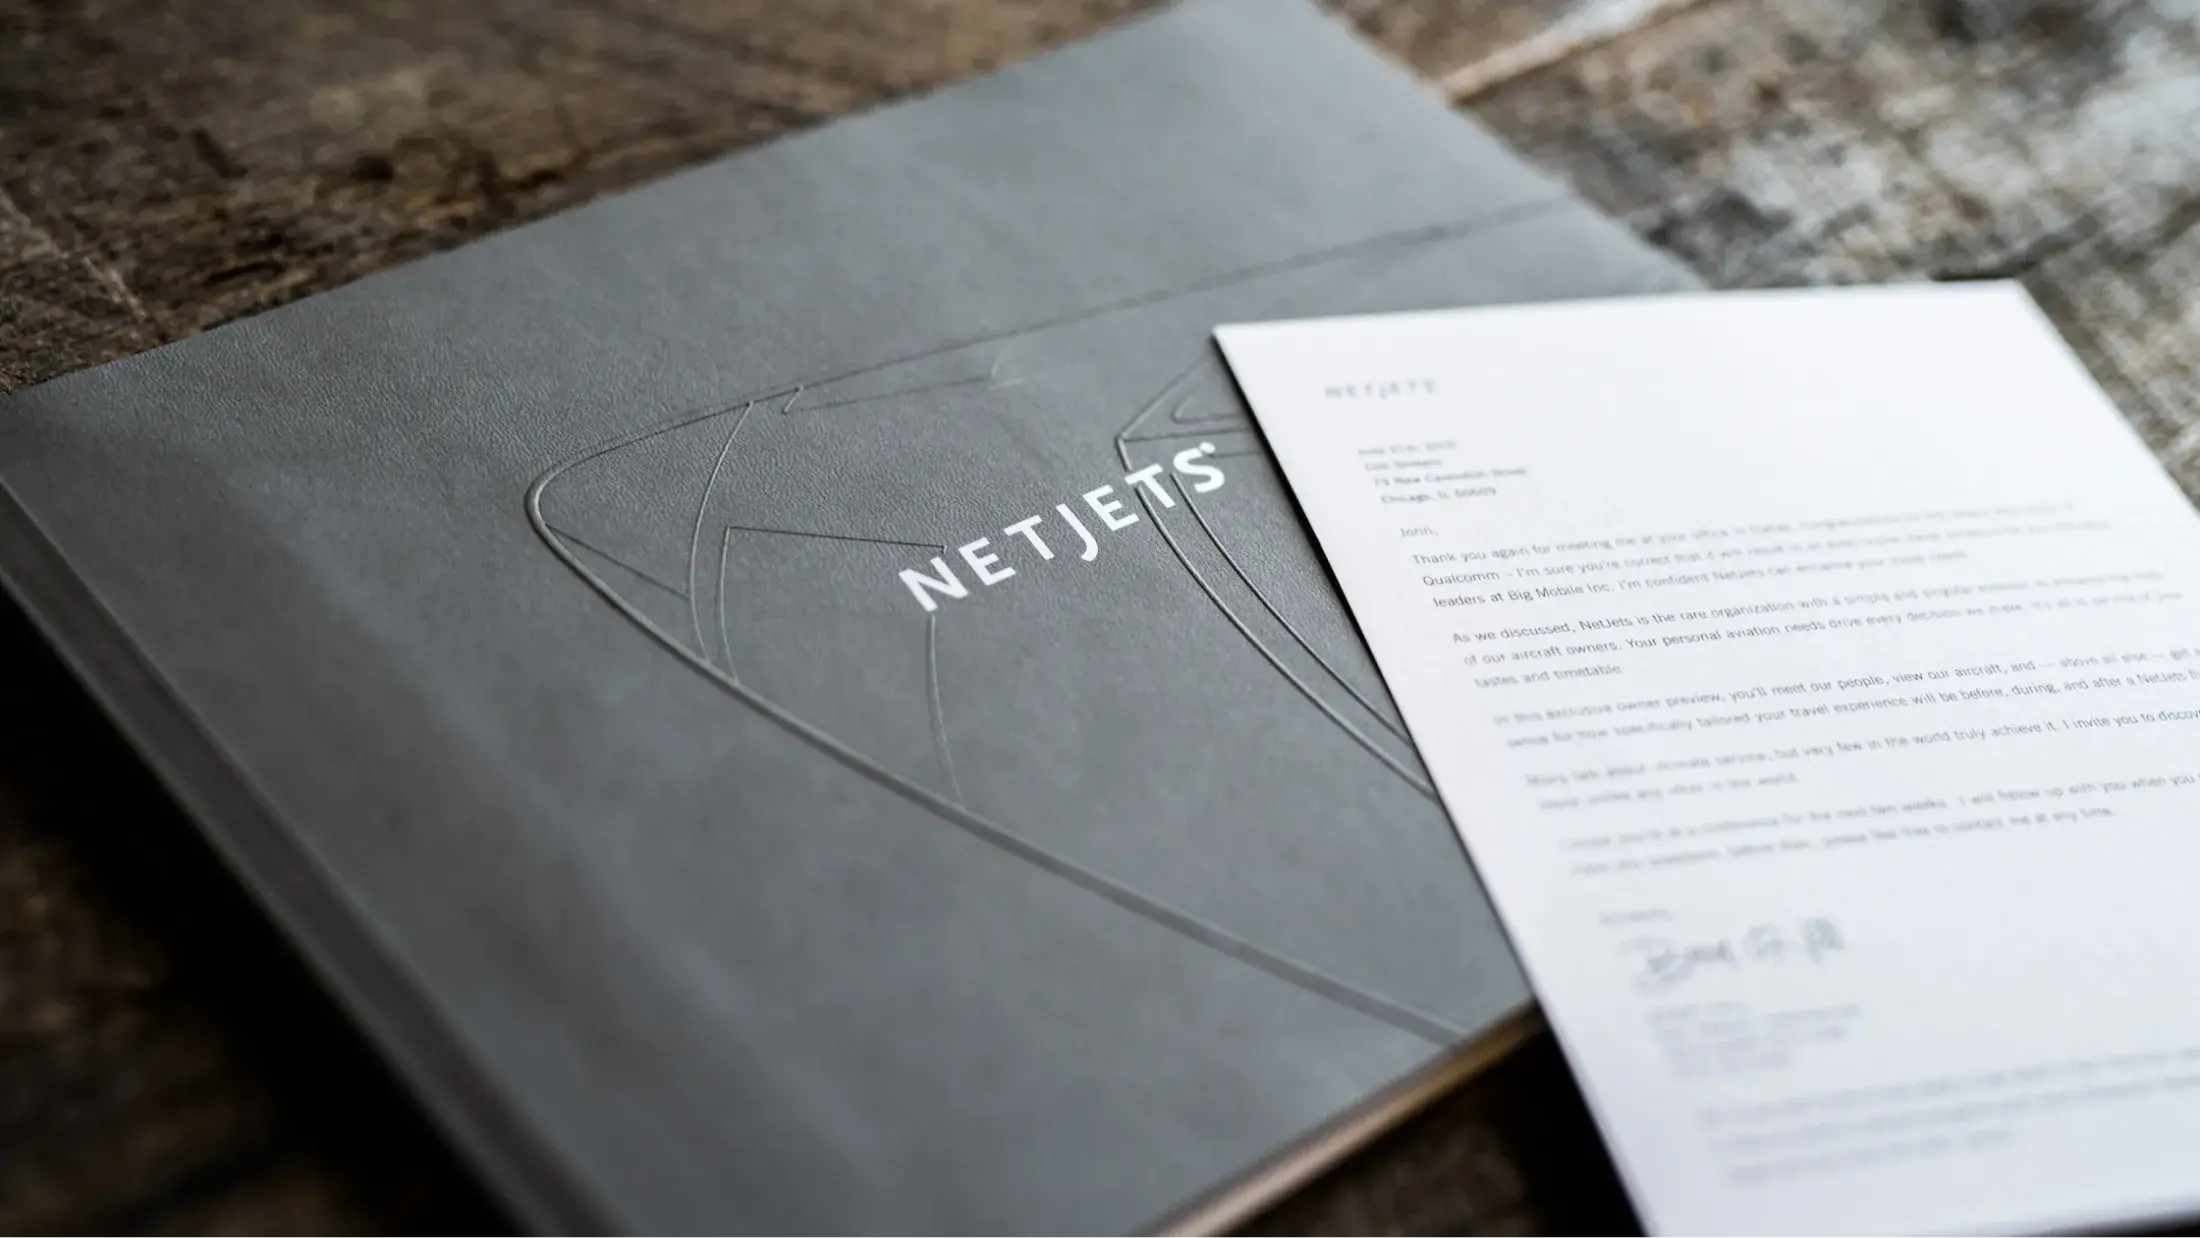 Netjets book with accompanying letter